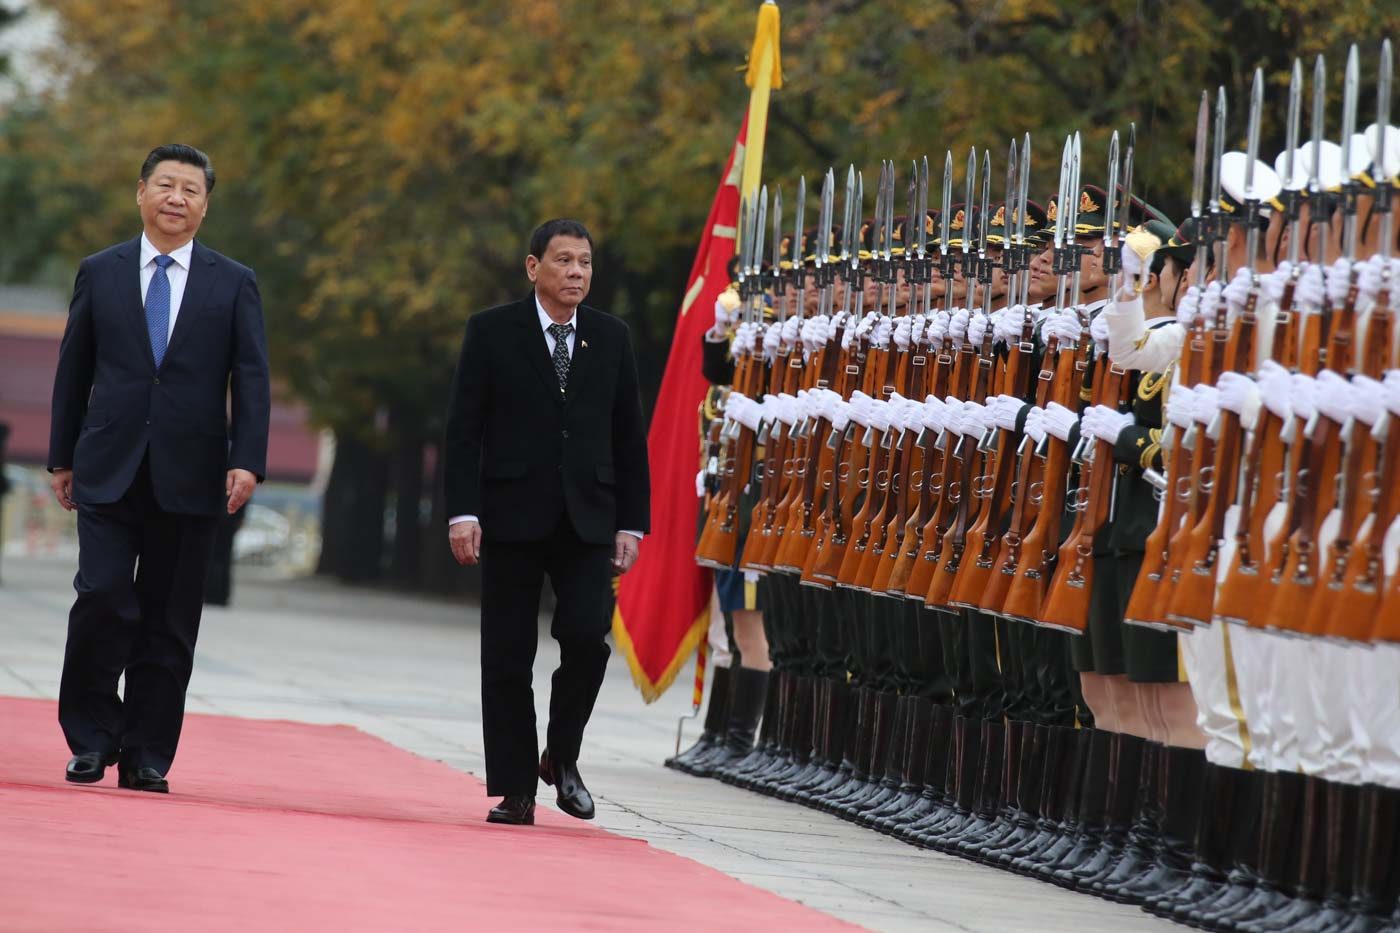 GRAND WELCOME. President Duterte and President Xi review the honor guards during the arrival ceremony at the Great Hall of the People in Beijing on October 20. Photo by King Rodriguez/PPD 